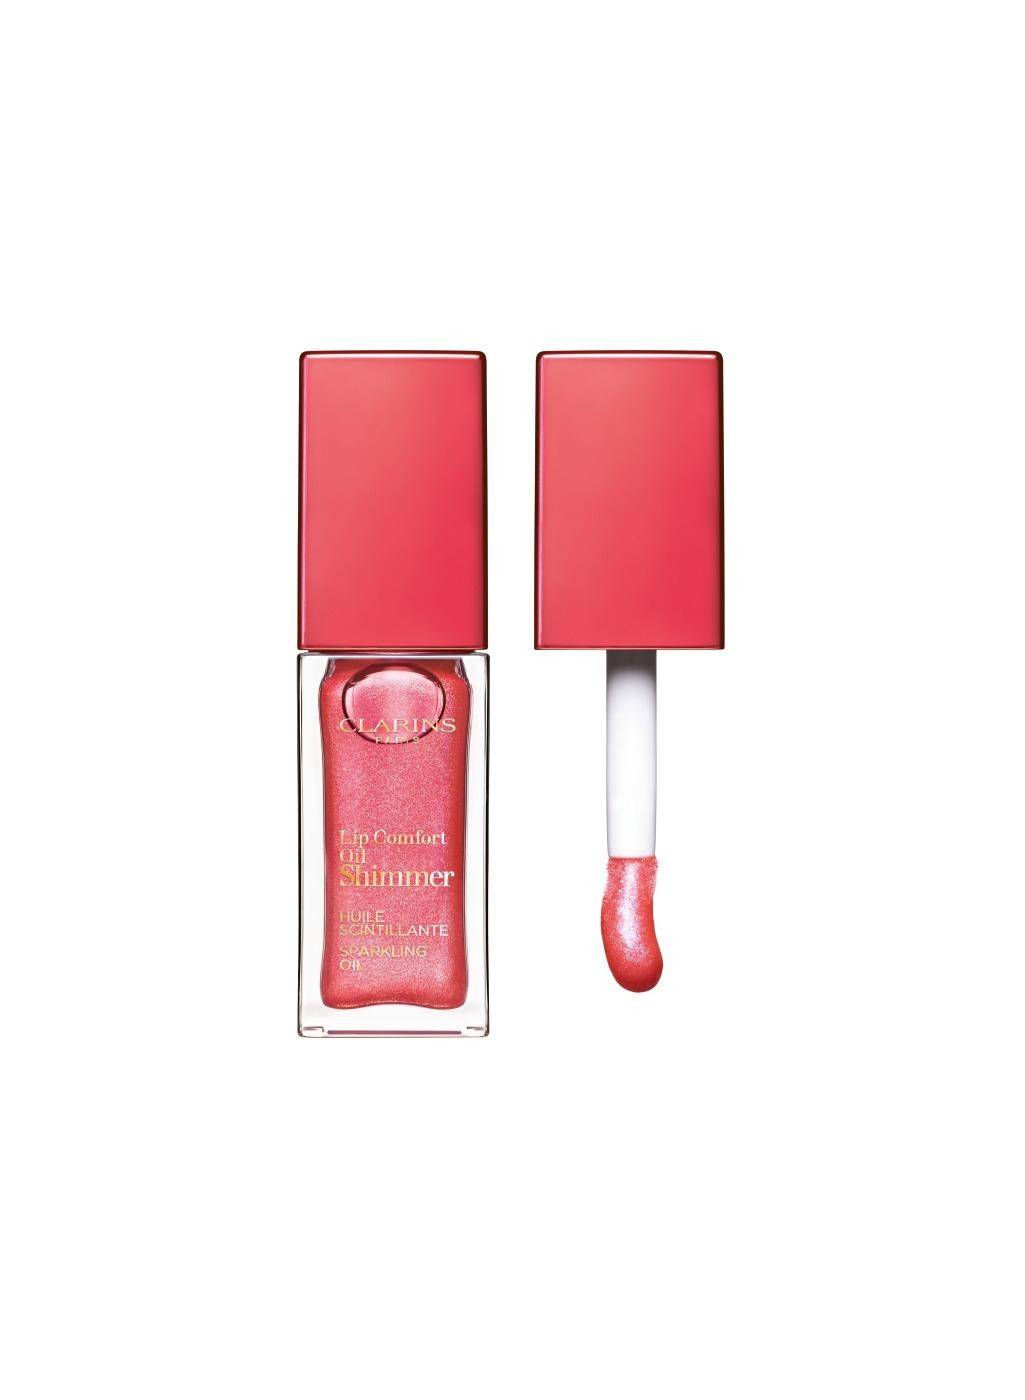 Clarins Lip Comfort Oil Shimmer 04 Intense Pink Lady 7ml